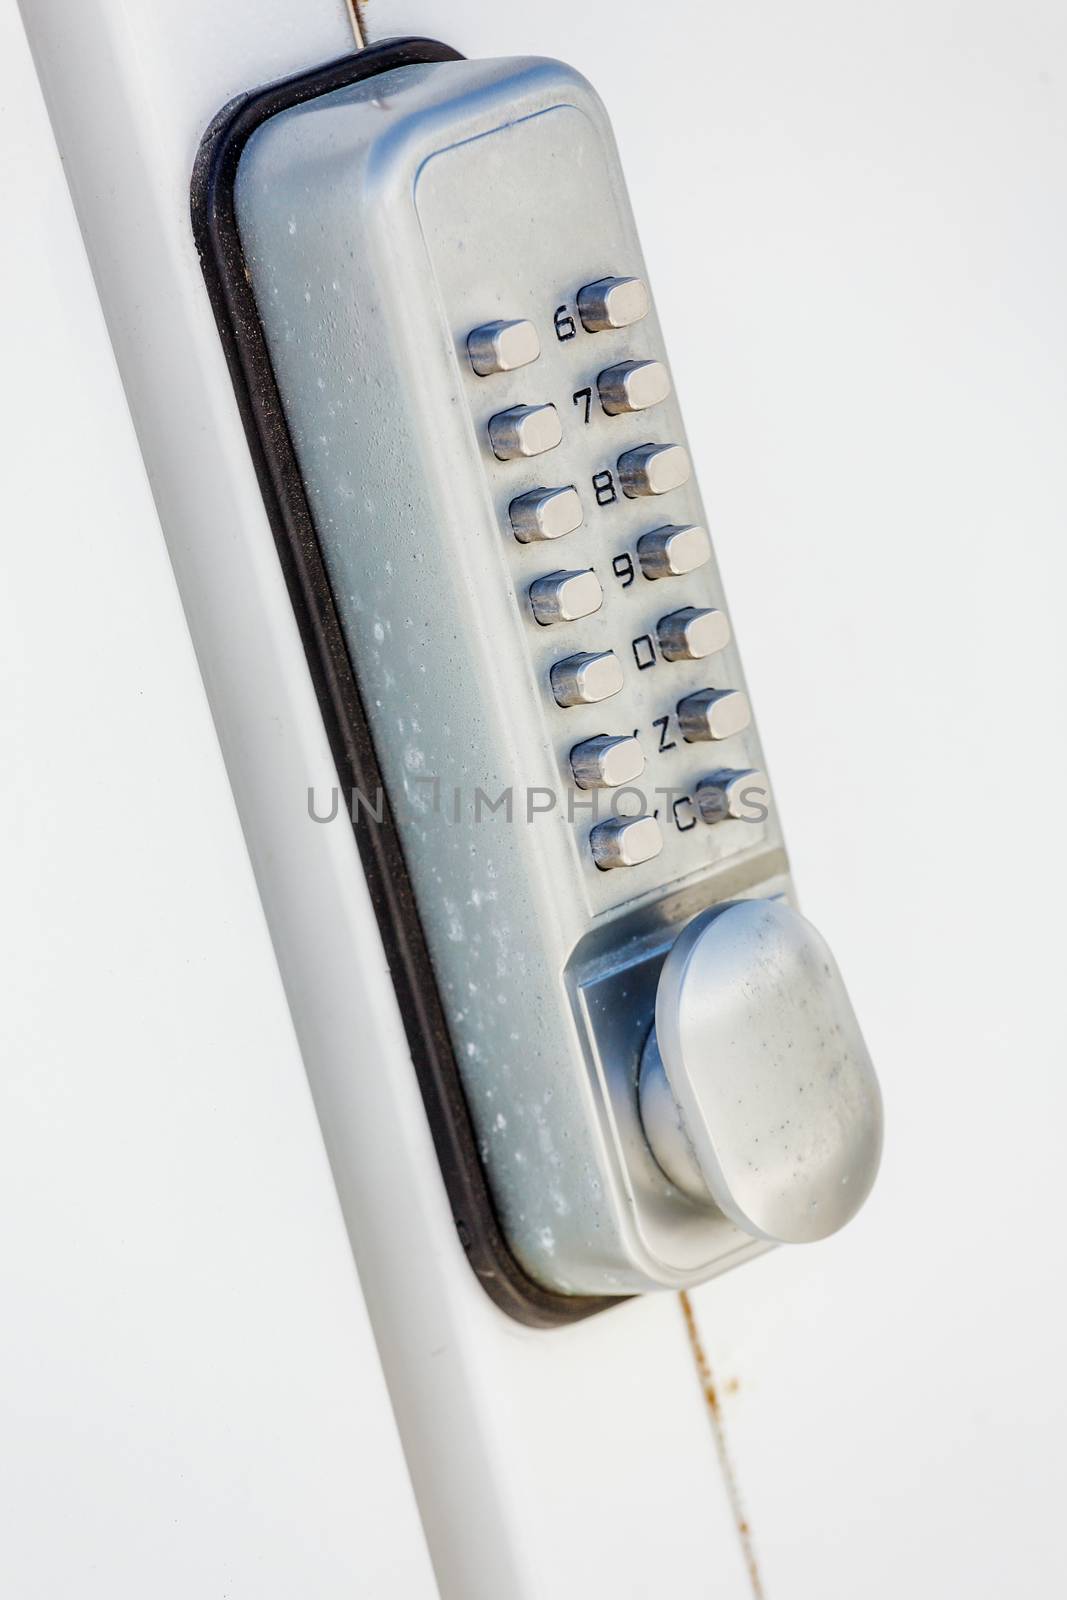 Security access with keypad on the door by pixinoo